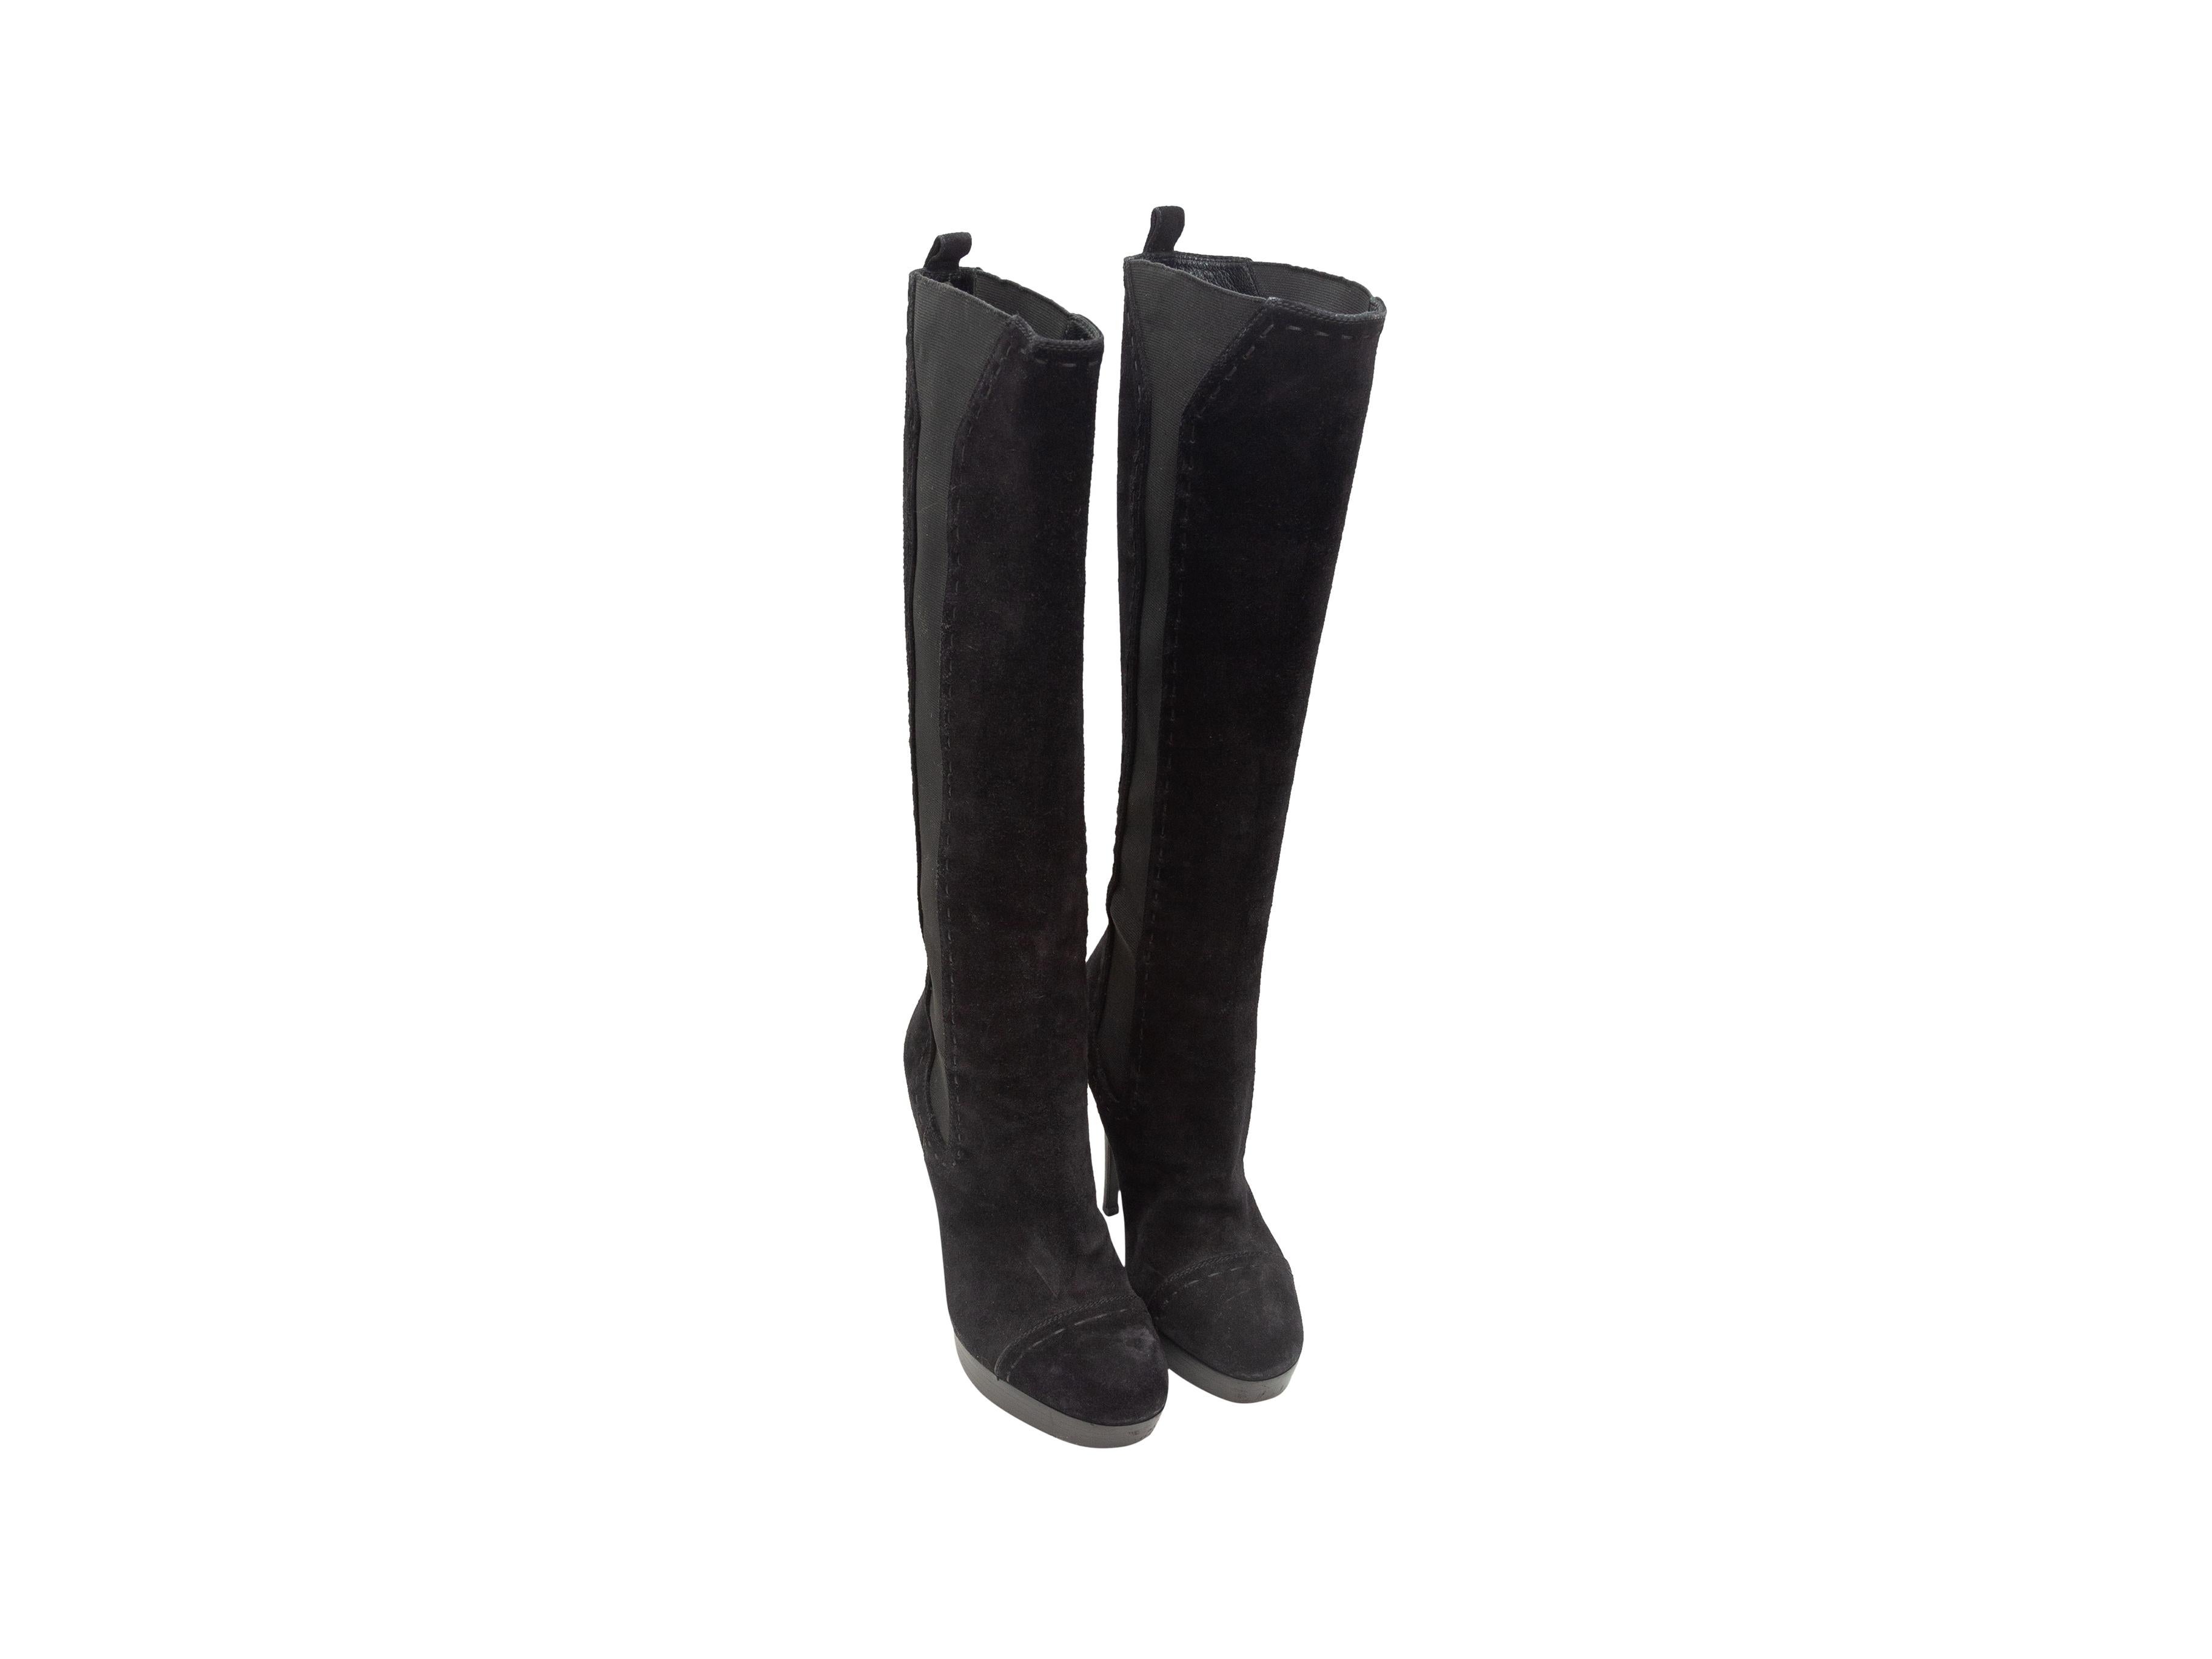 Product details: Black suede platform knee-high boots by Yves Saint Laurent. Stacked heels. Elasticized gores at sides. 5